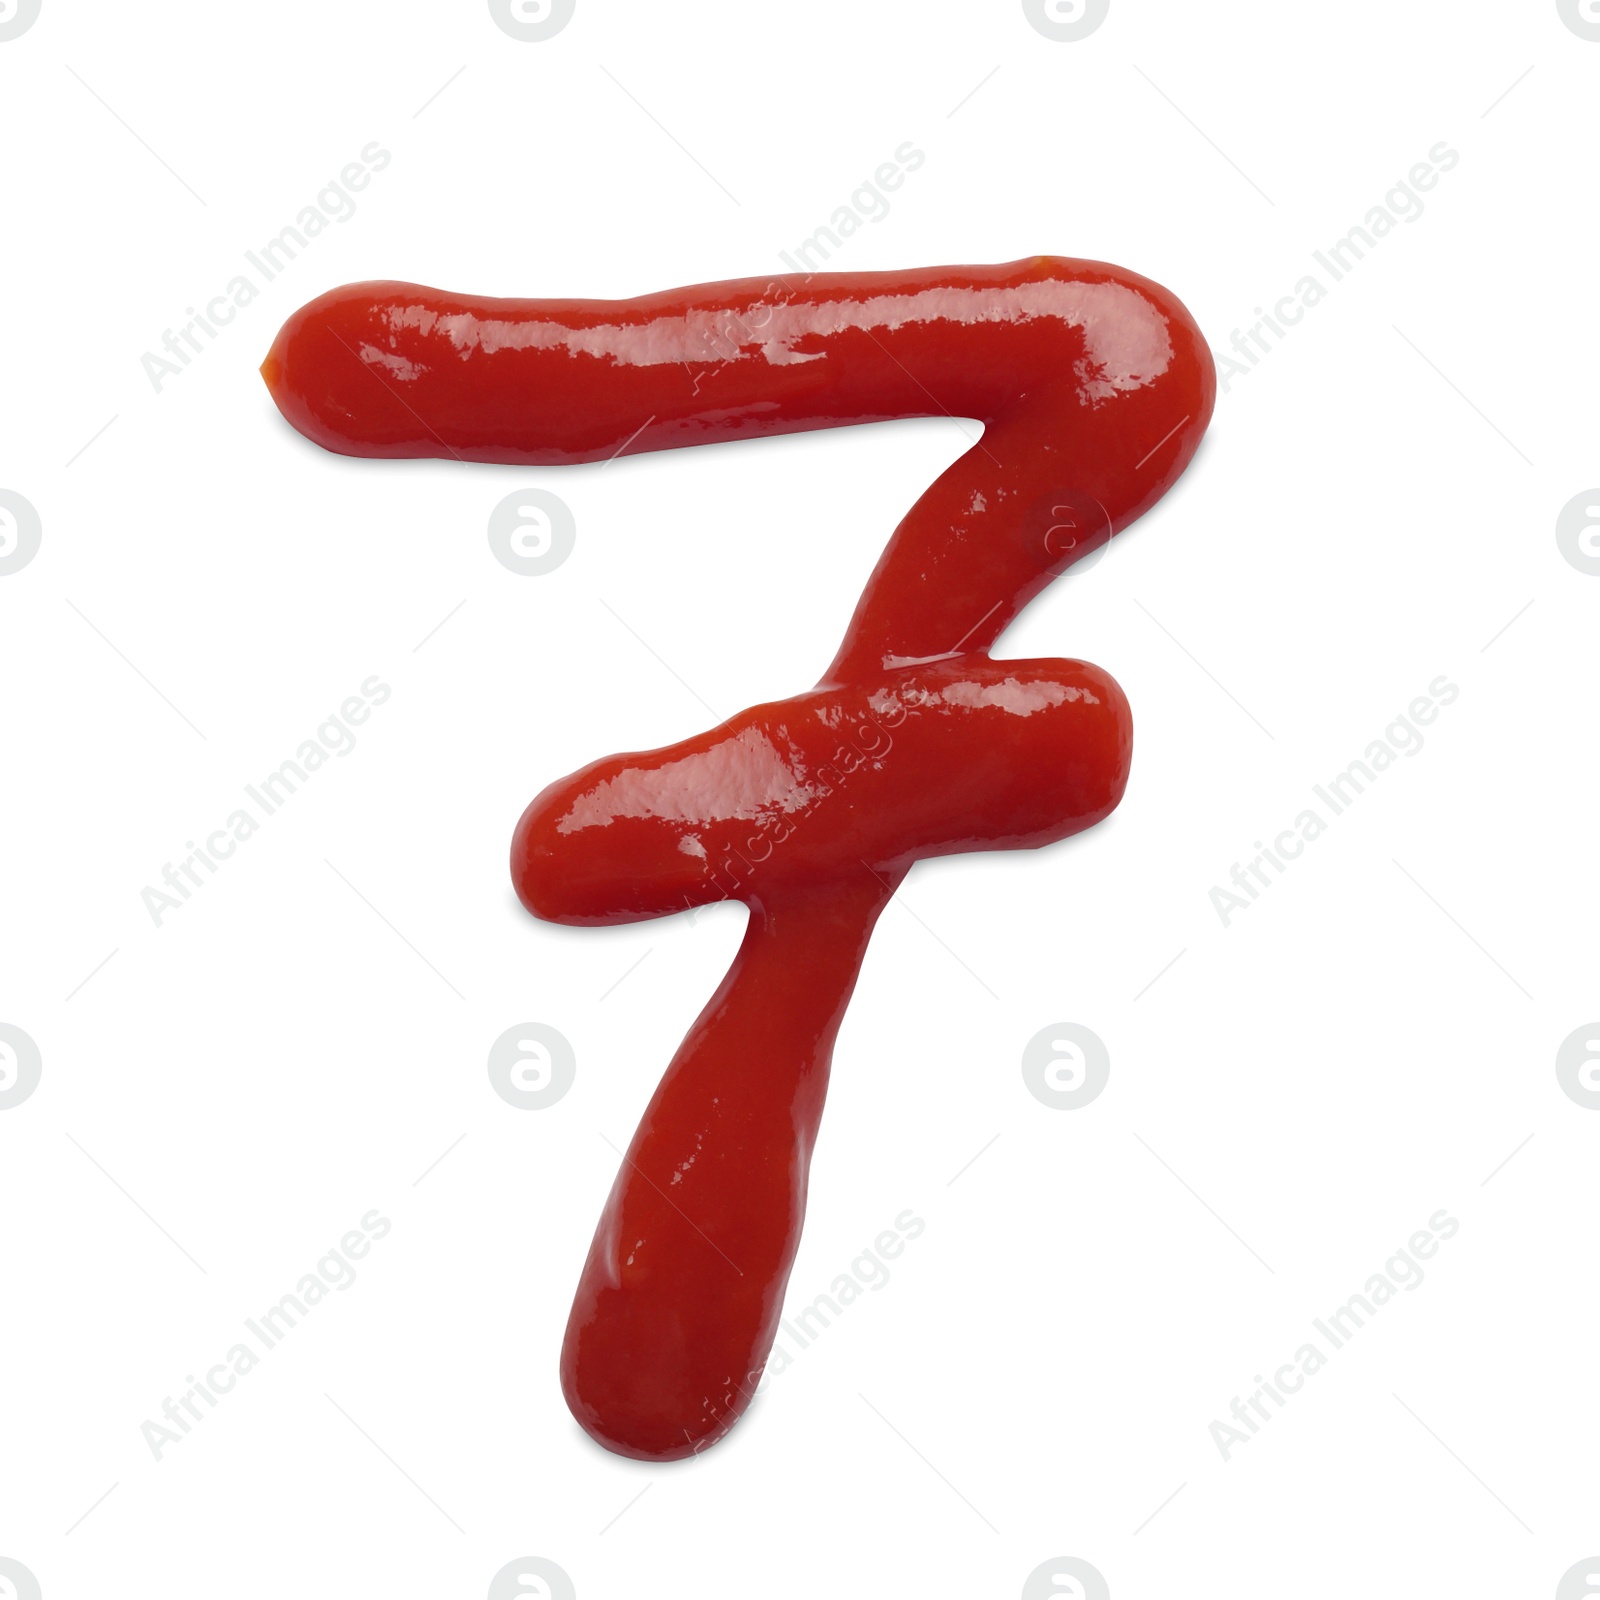 Photo of Number seven made with ketchup on white background, top view